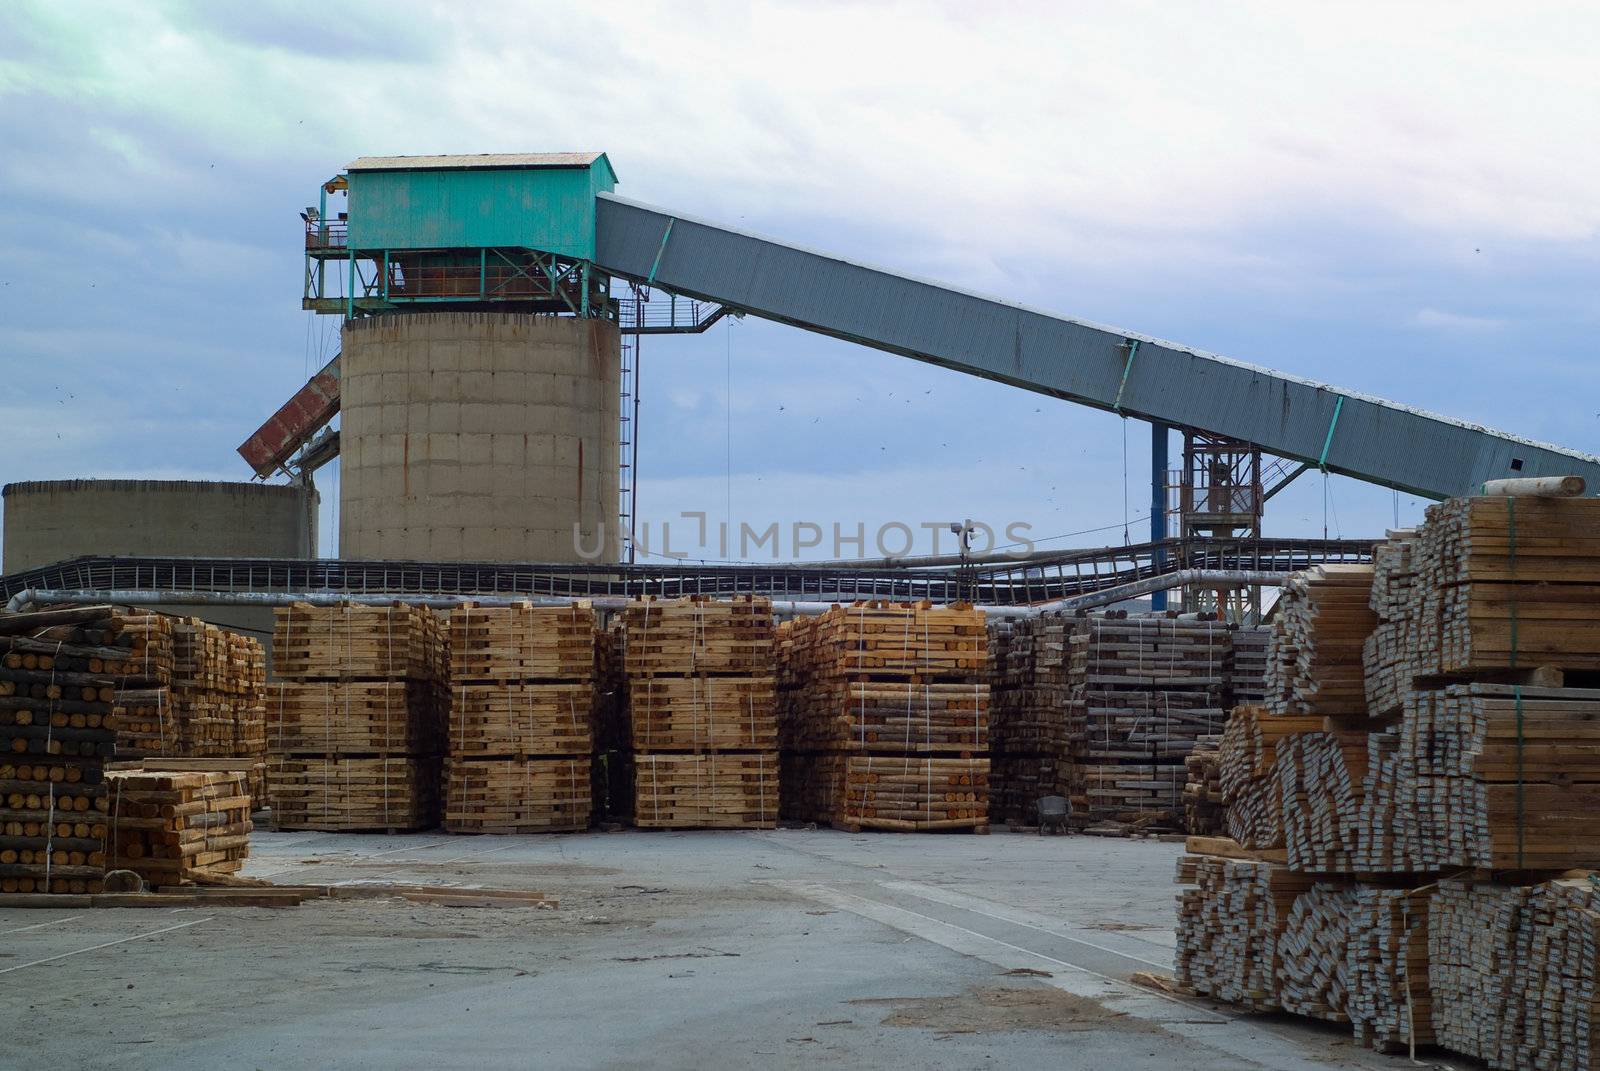 Timber industrial wood factory industry image with plant tower in background